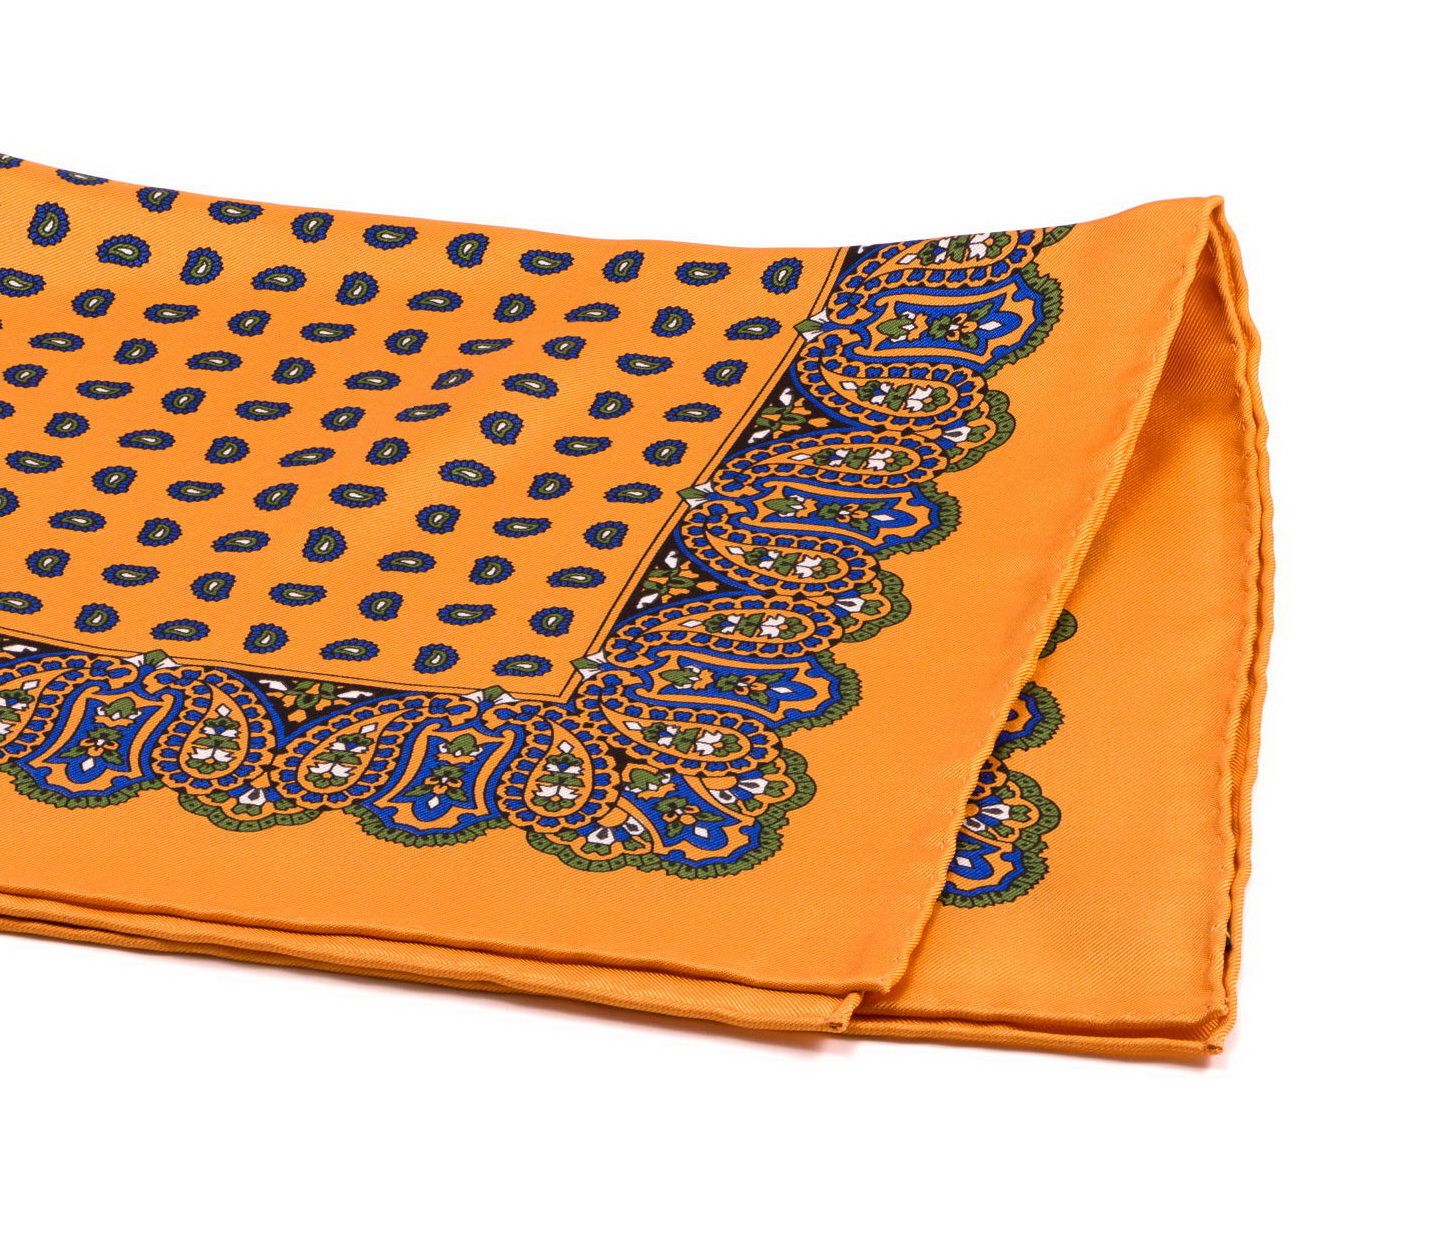 Silk Pocket Square in Sunflower Orange with Small & Large Paisley ...